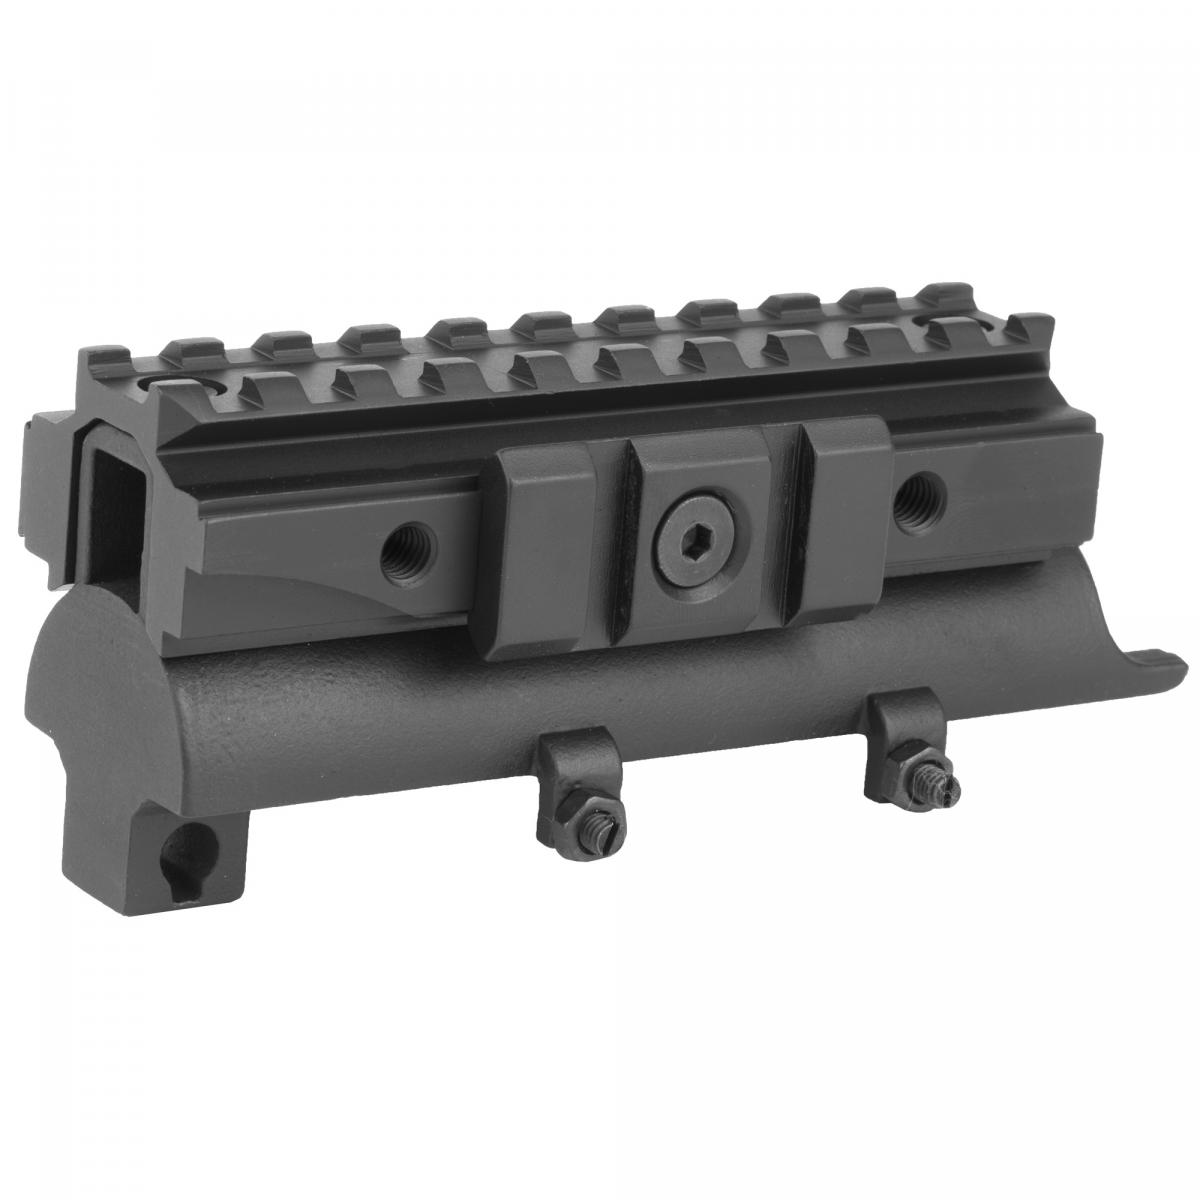 Every day low price on NcSTAR SKS Tri-Rail Receiver Cover. 